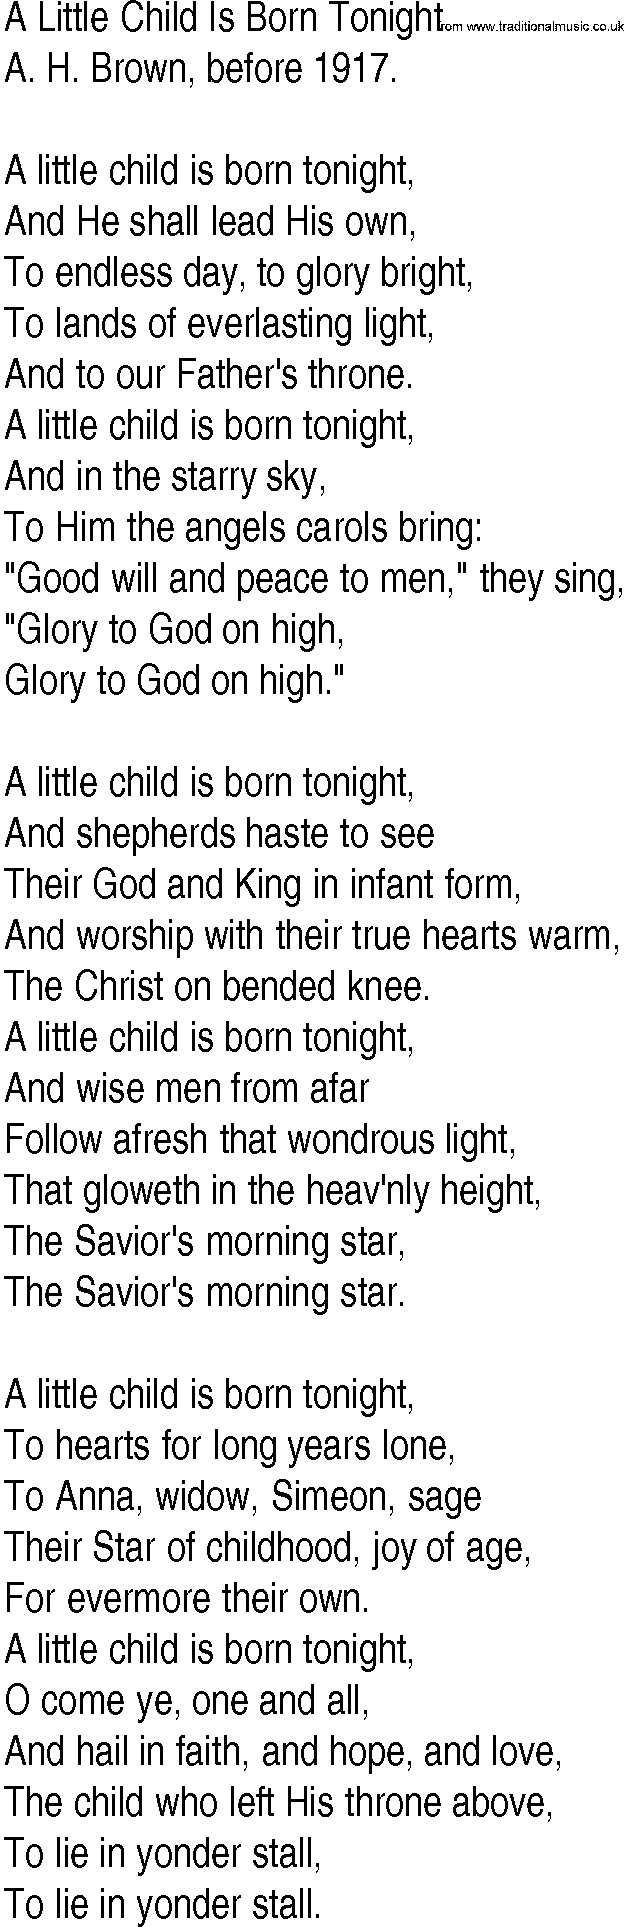 Hymn and Gospel Song: A Little Child Is Born Tonight by A H Brown before lyrics